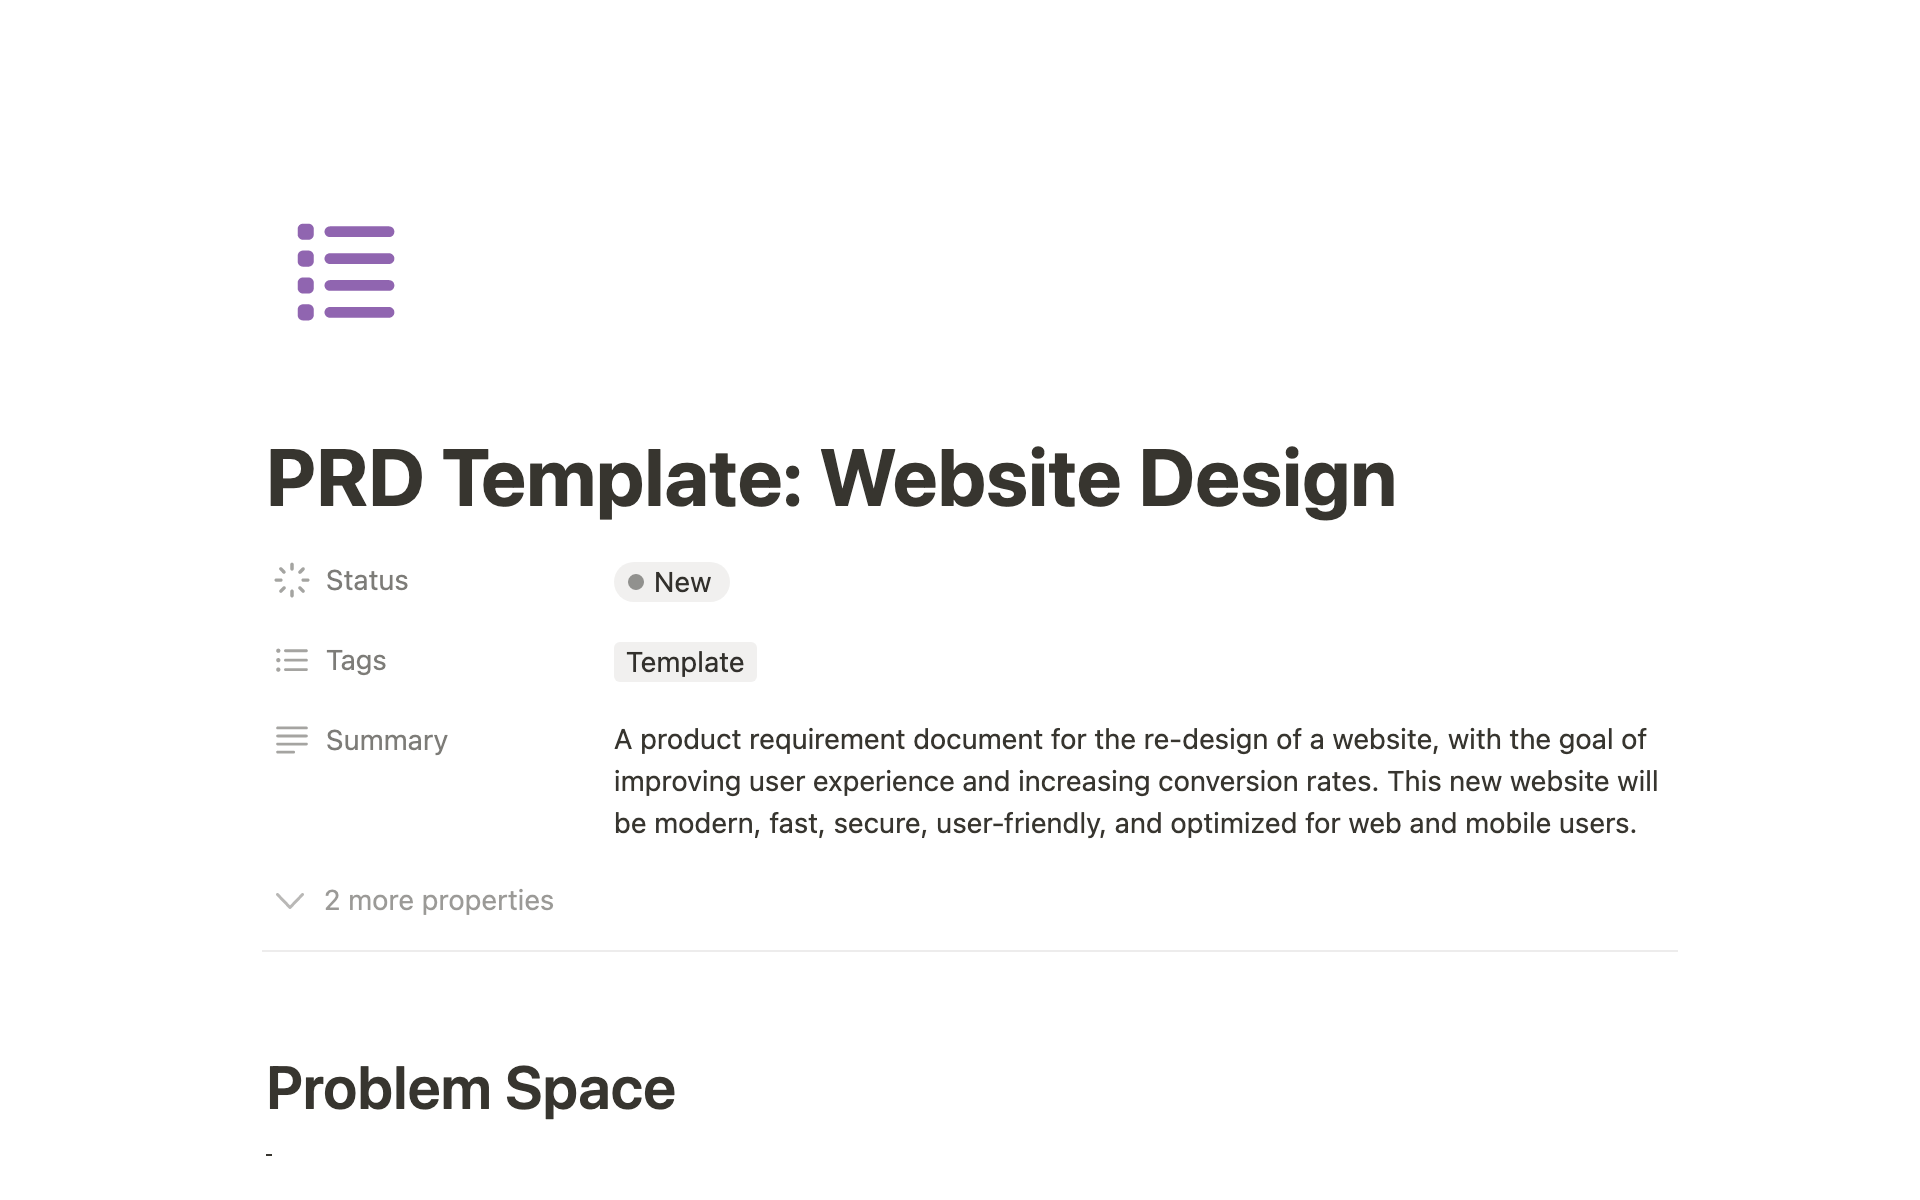 This PRD template guides the re-design of a website.